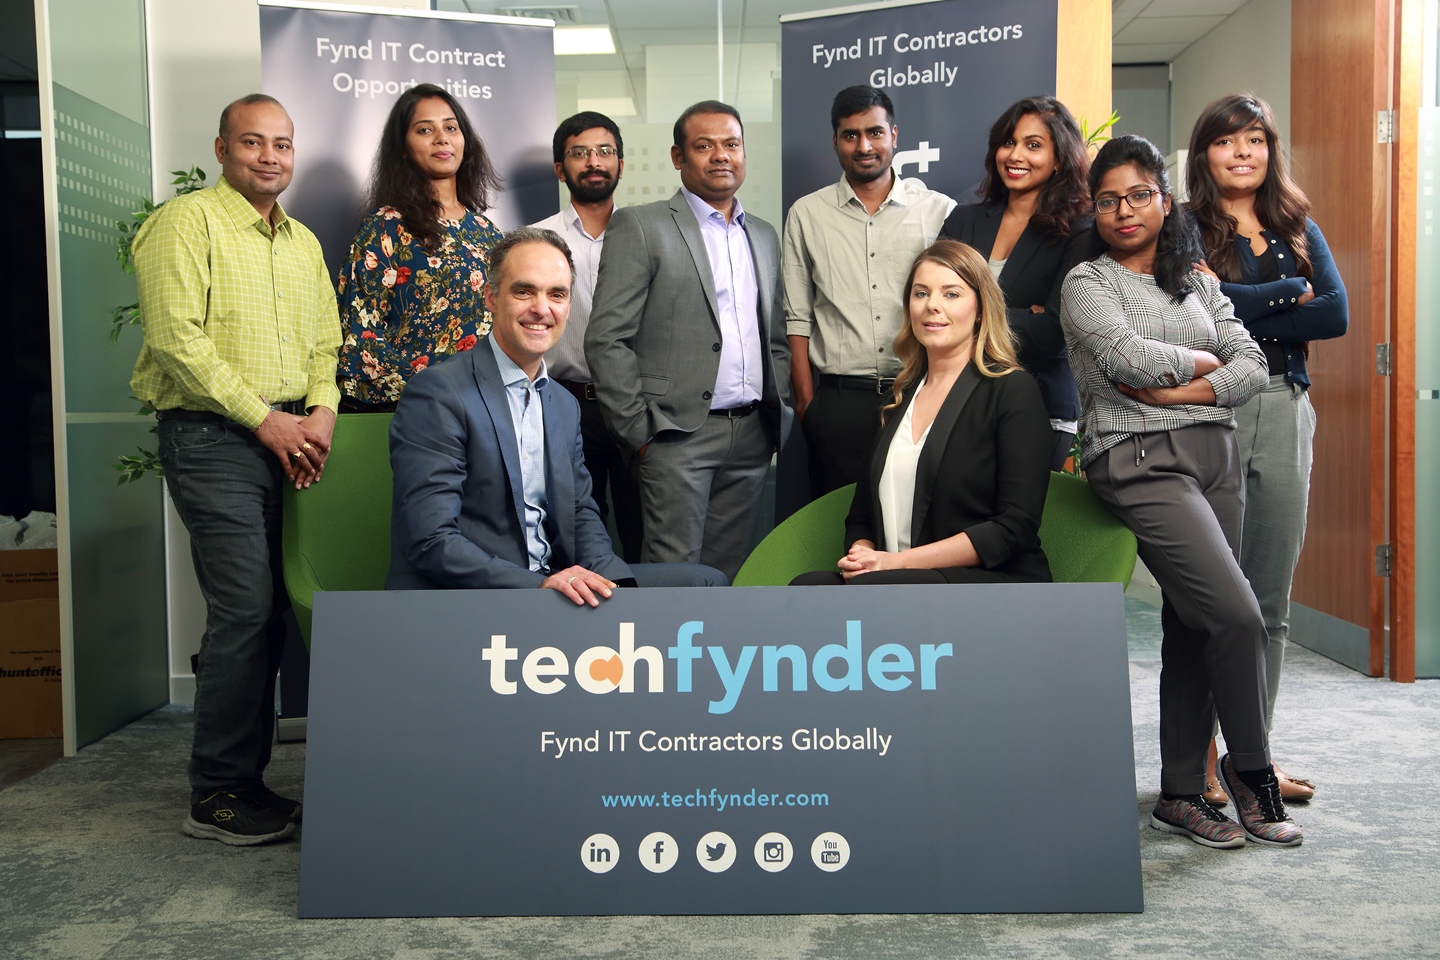 techfynder-is-connecting-indian-it-professionals-with-global-employers-in-all-locations